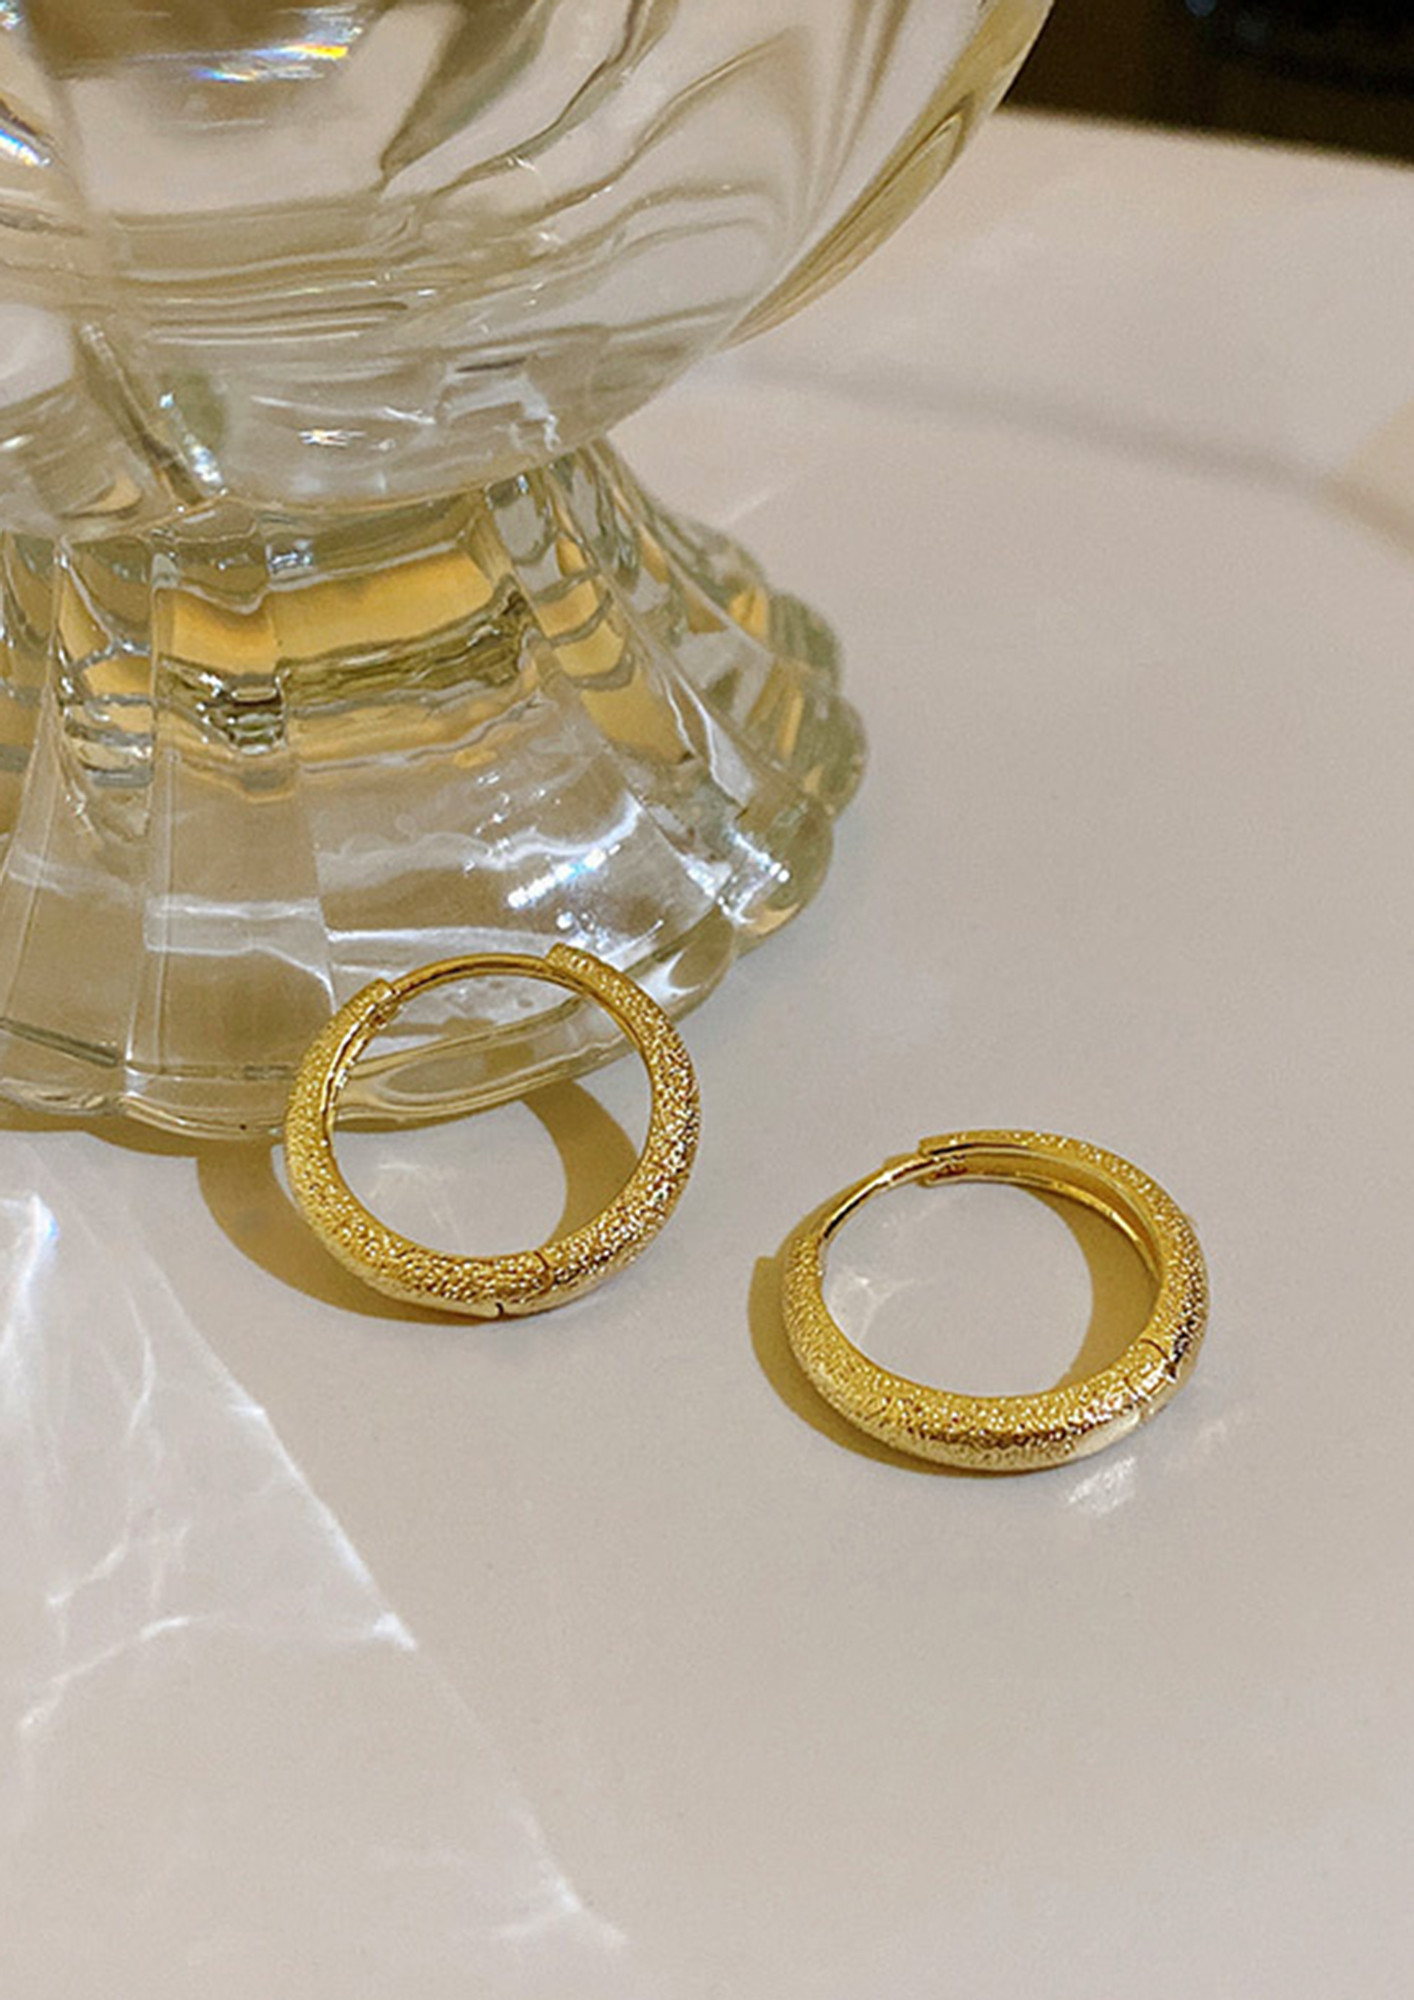 SIMPLE GOLD-TONED ROUND JEWEL EARRINGS